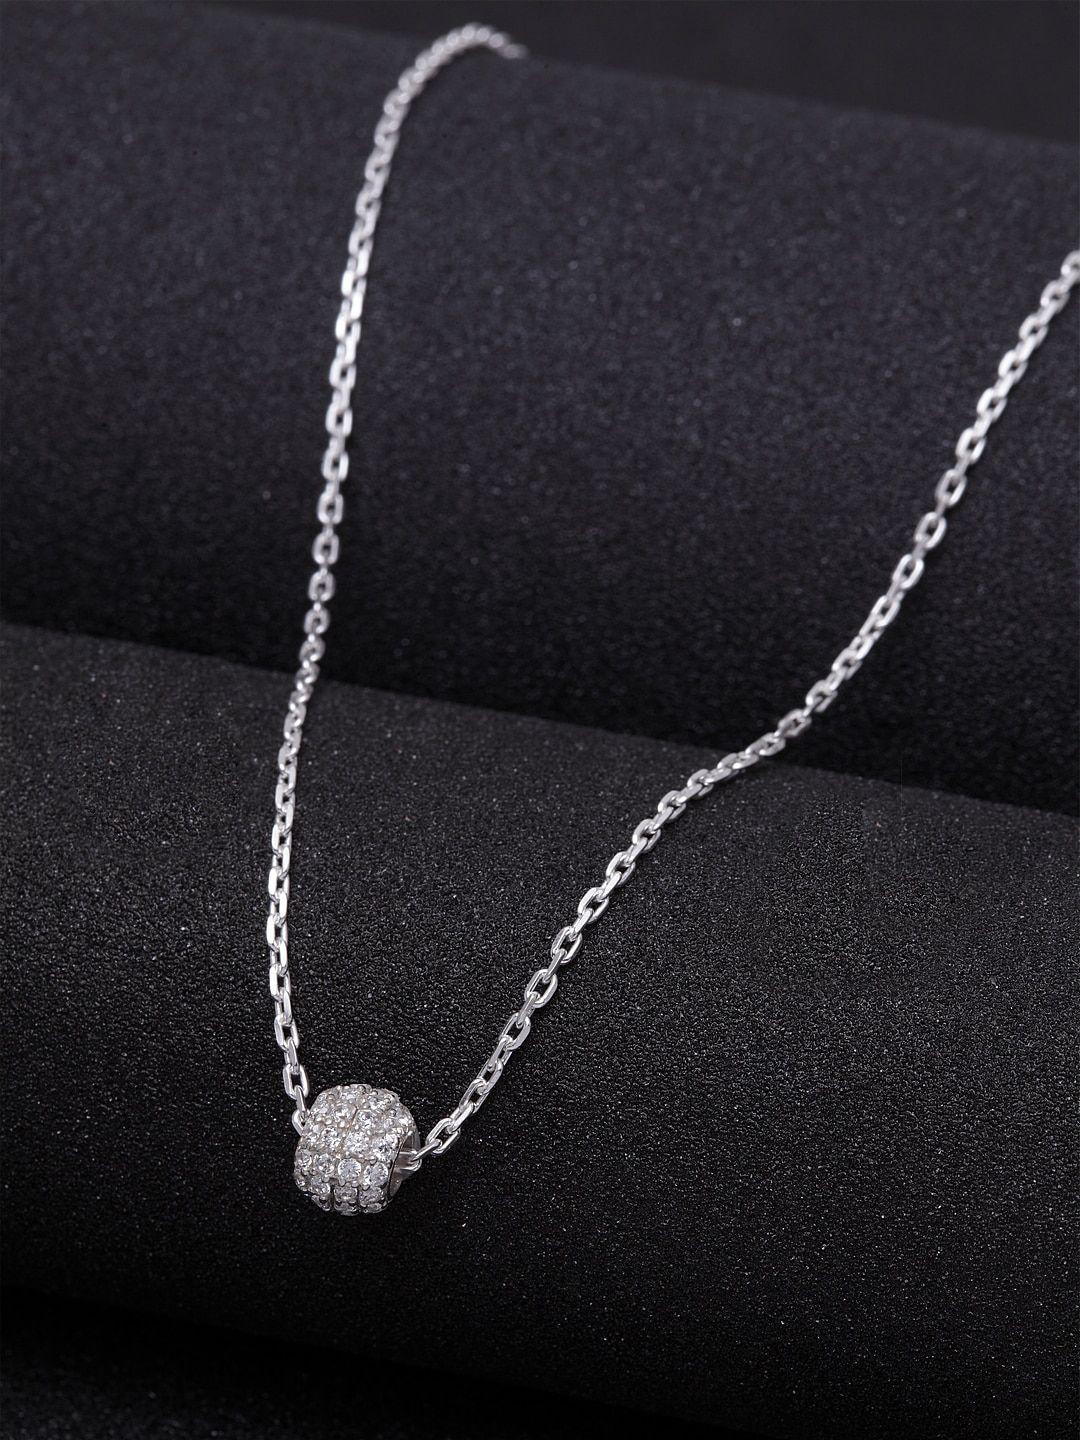 clara silver-toned sterling silver rhodium-plated chain with pendant